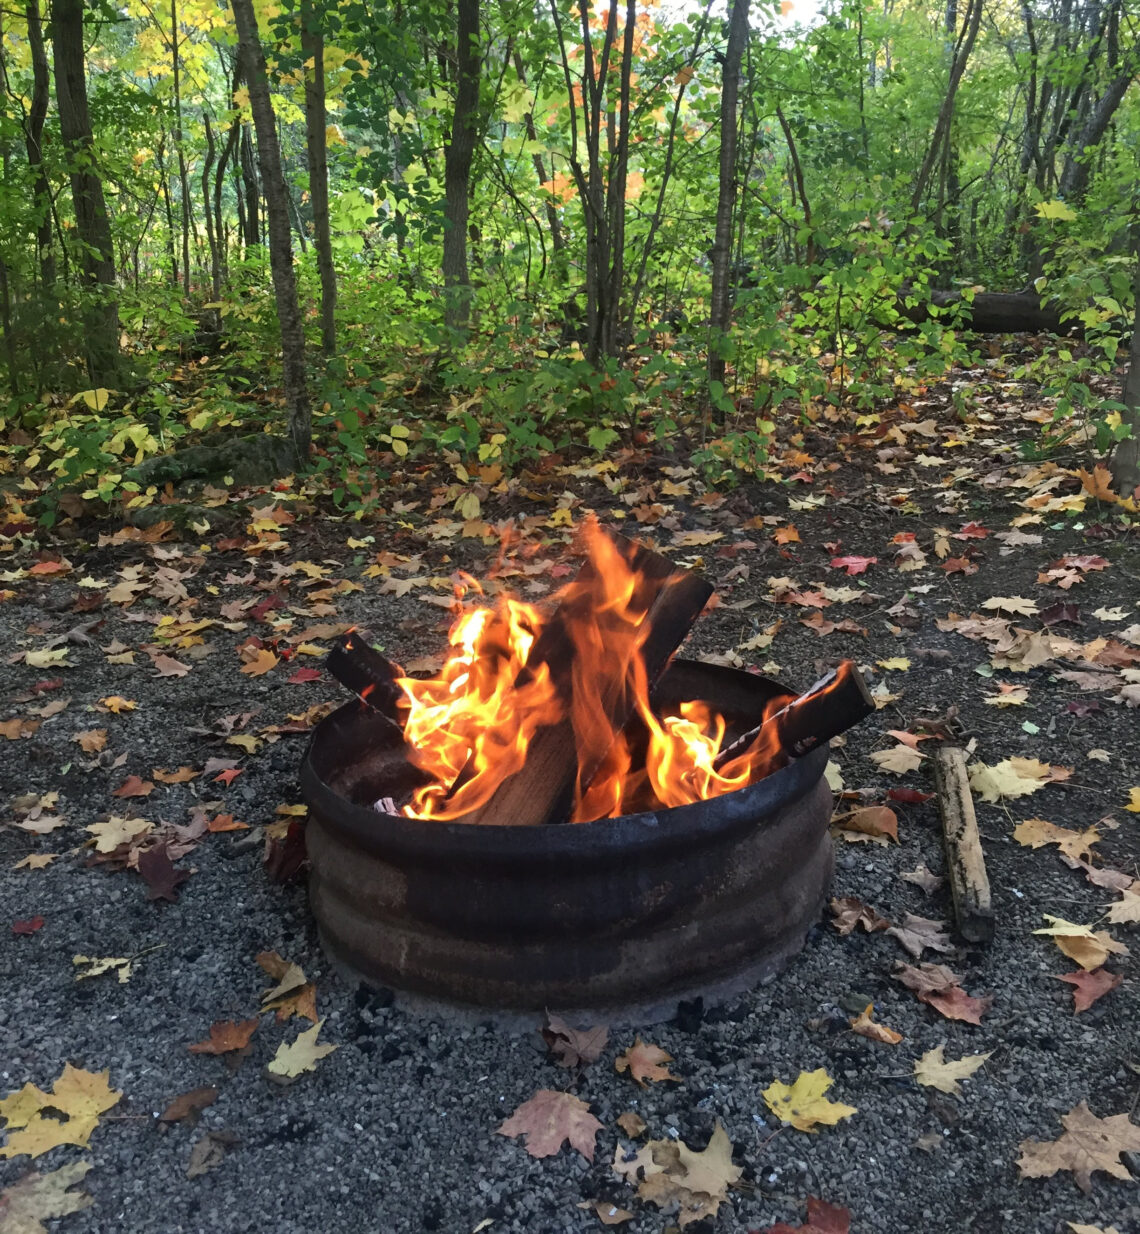 A campfire surrounded by trees on a fall day